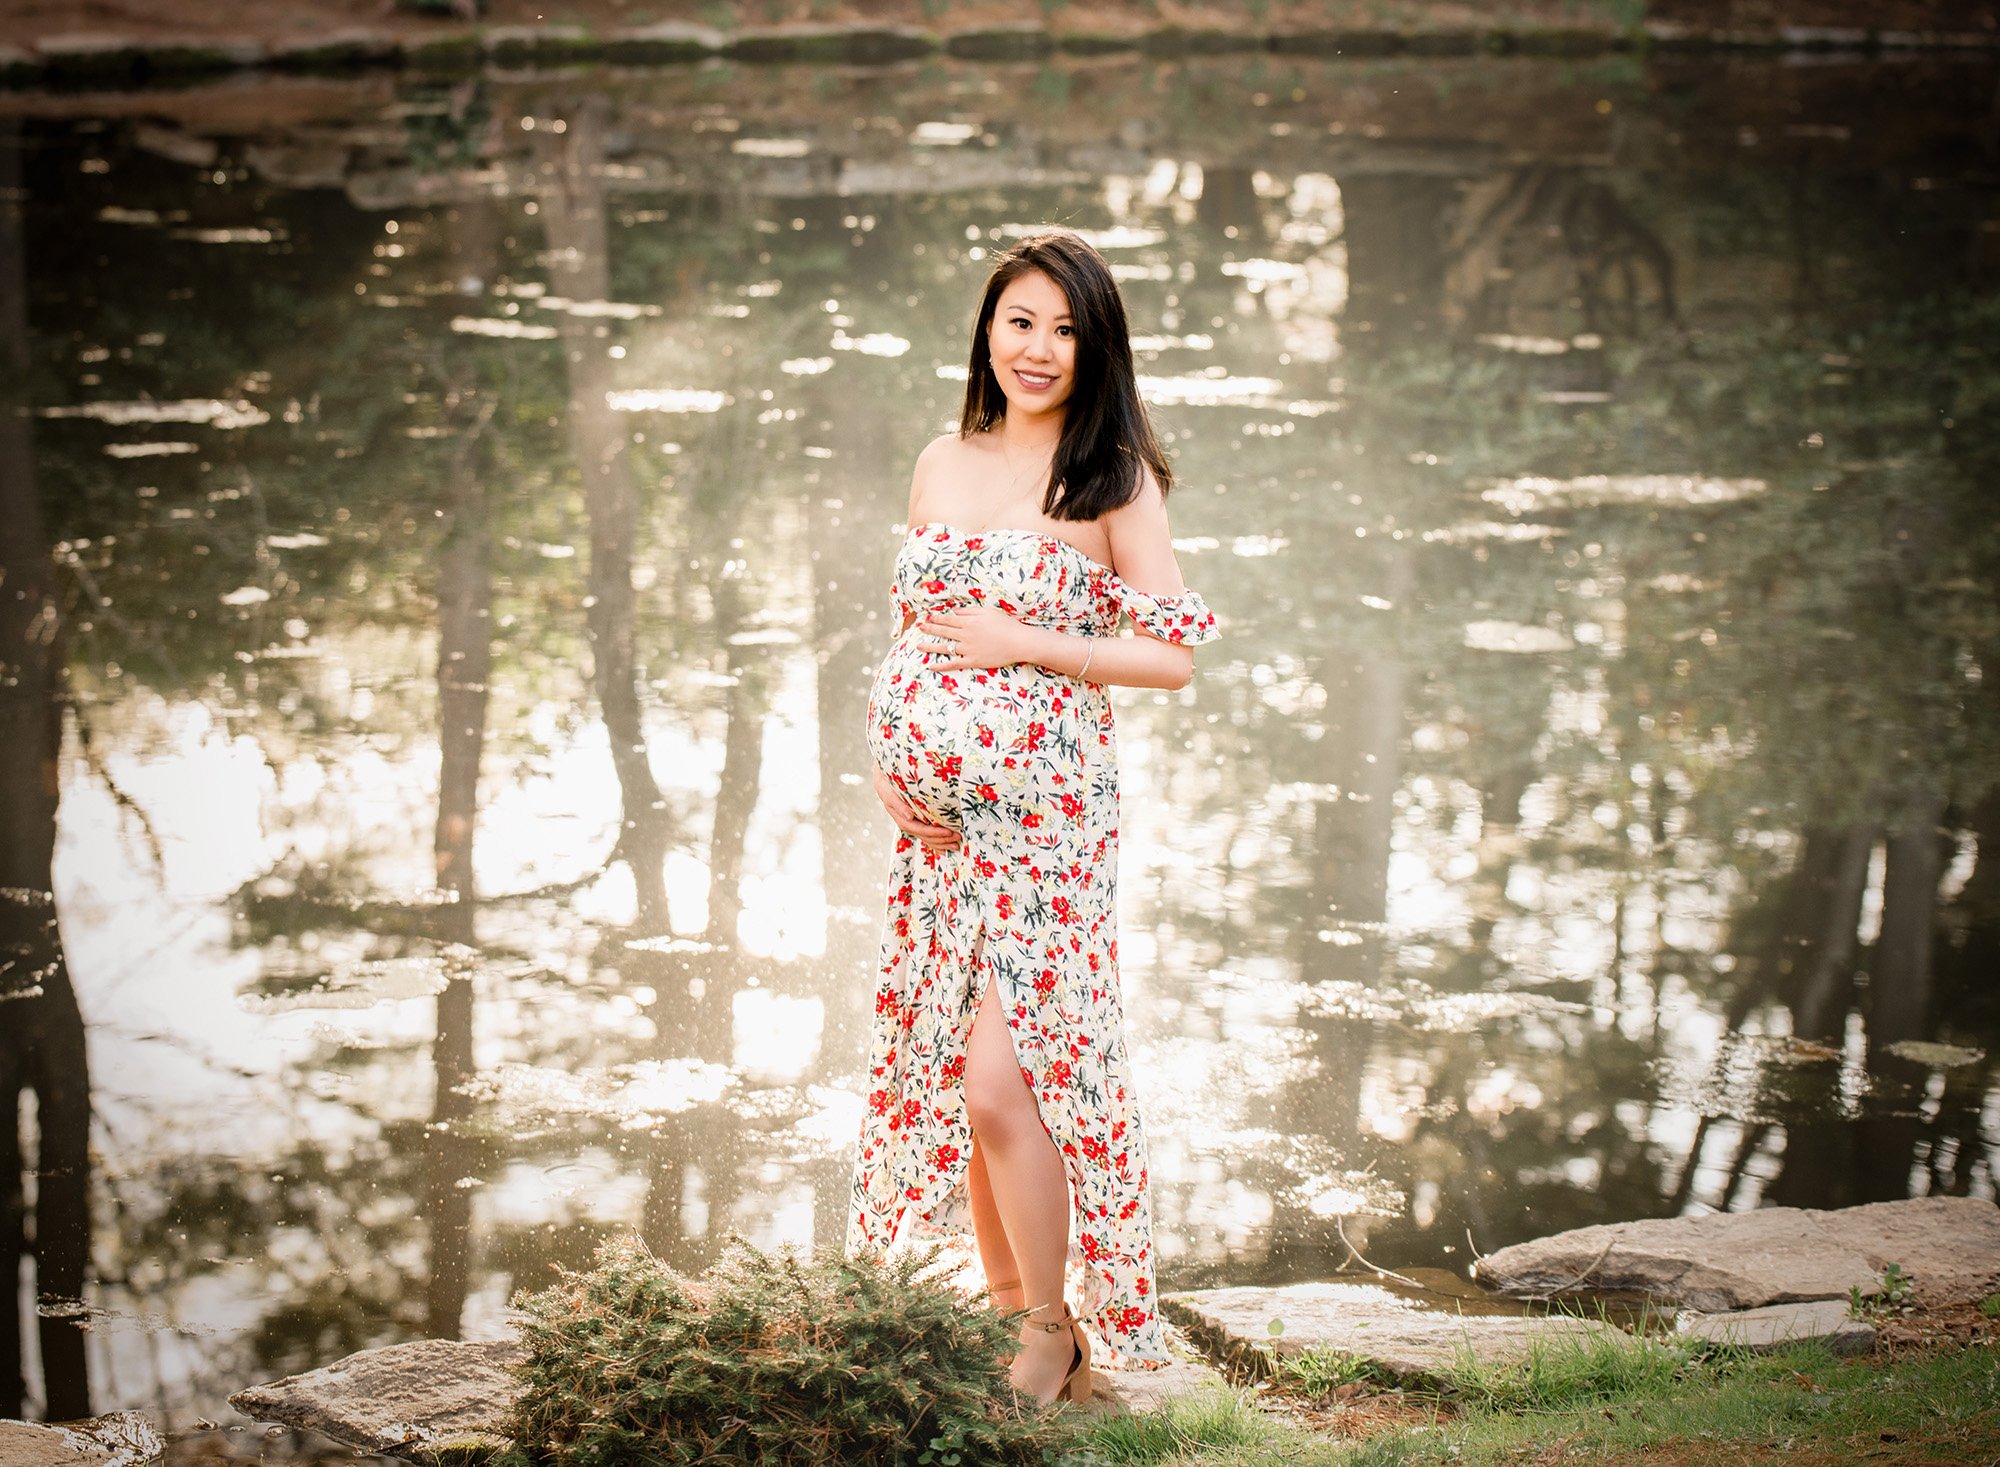 pregnant woman in floral maternity dress standing in front of a pond